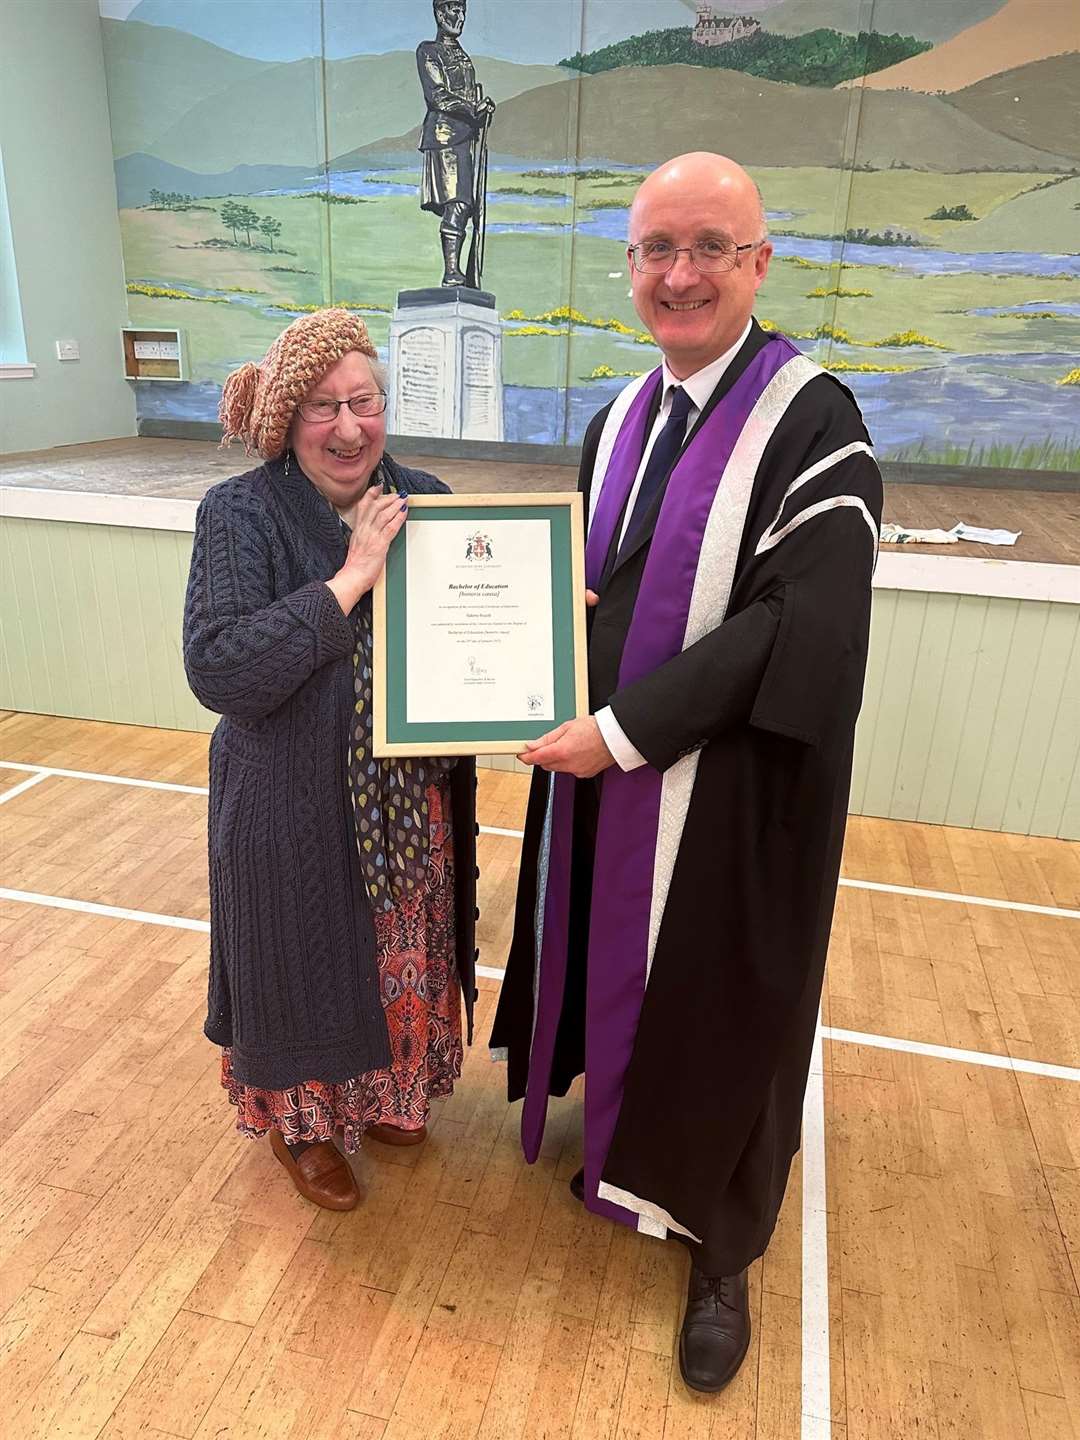 Valerie was then presented with her degree certificate by Professor Simco, on behalf of Liverpool Hope University. Photo: KoSDT